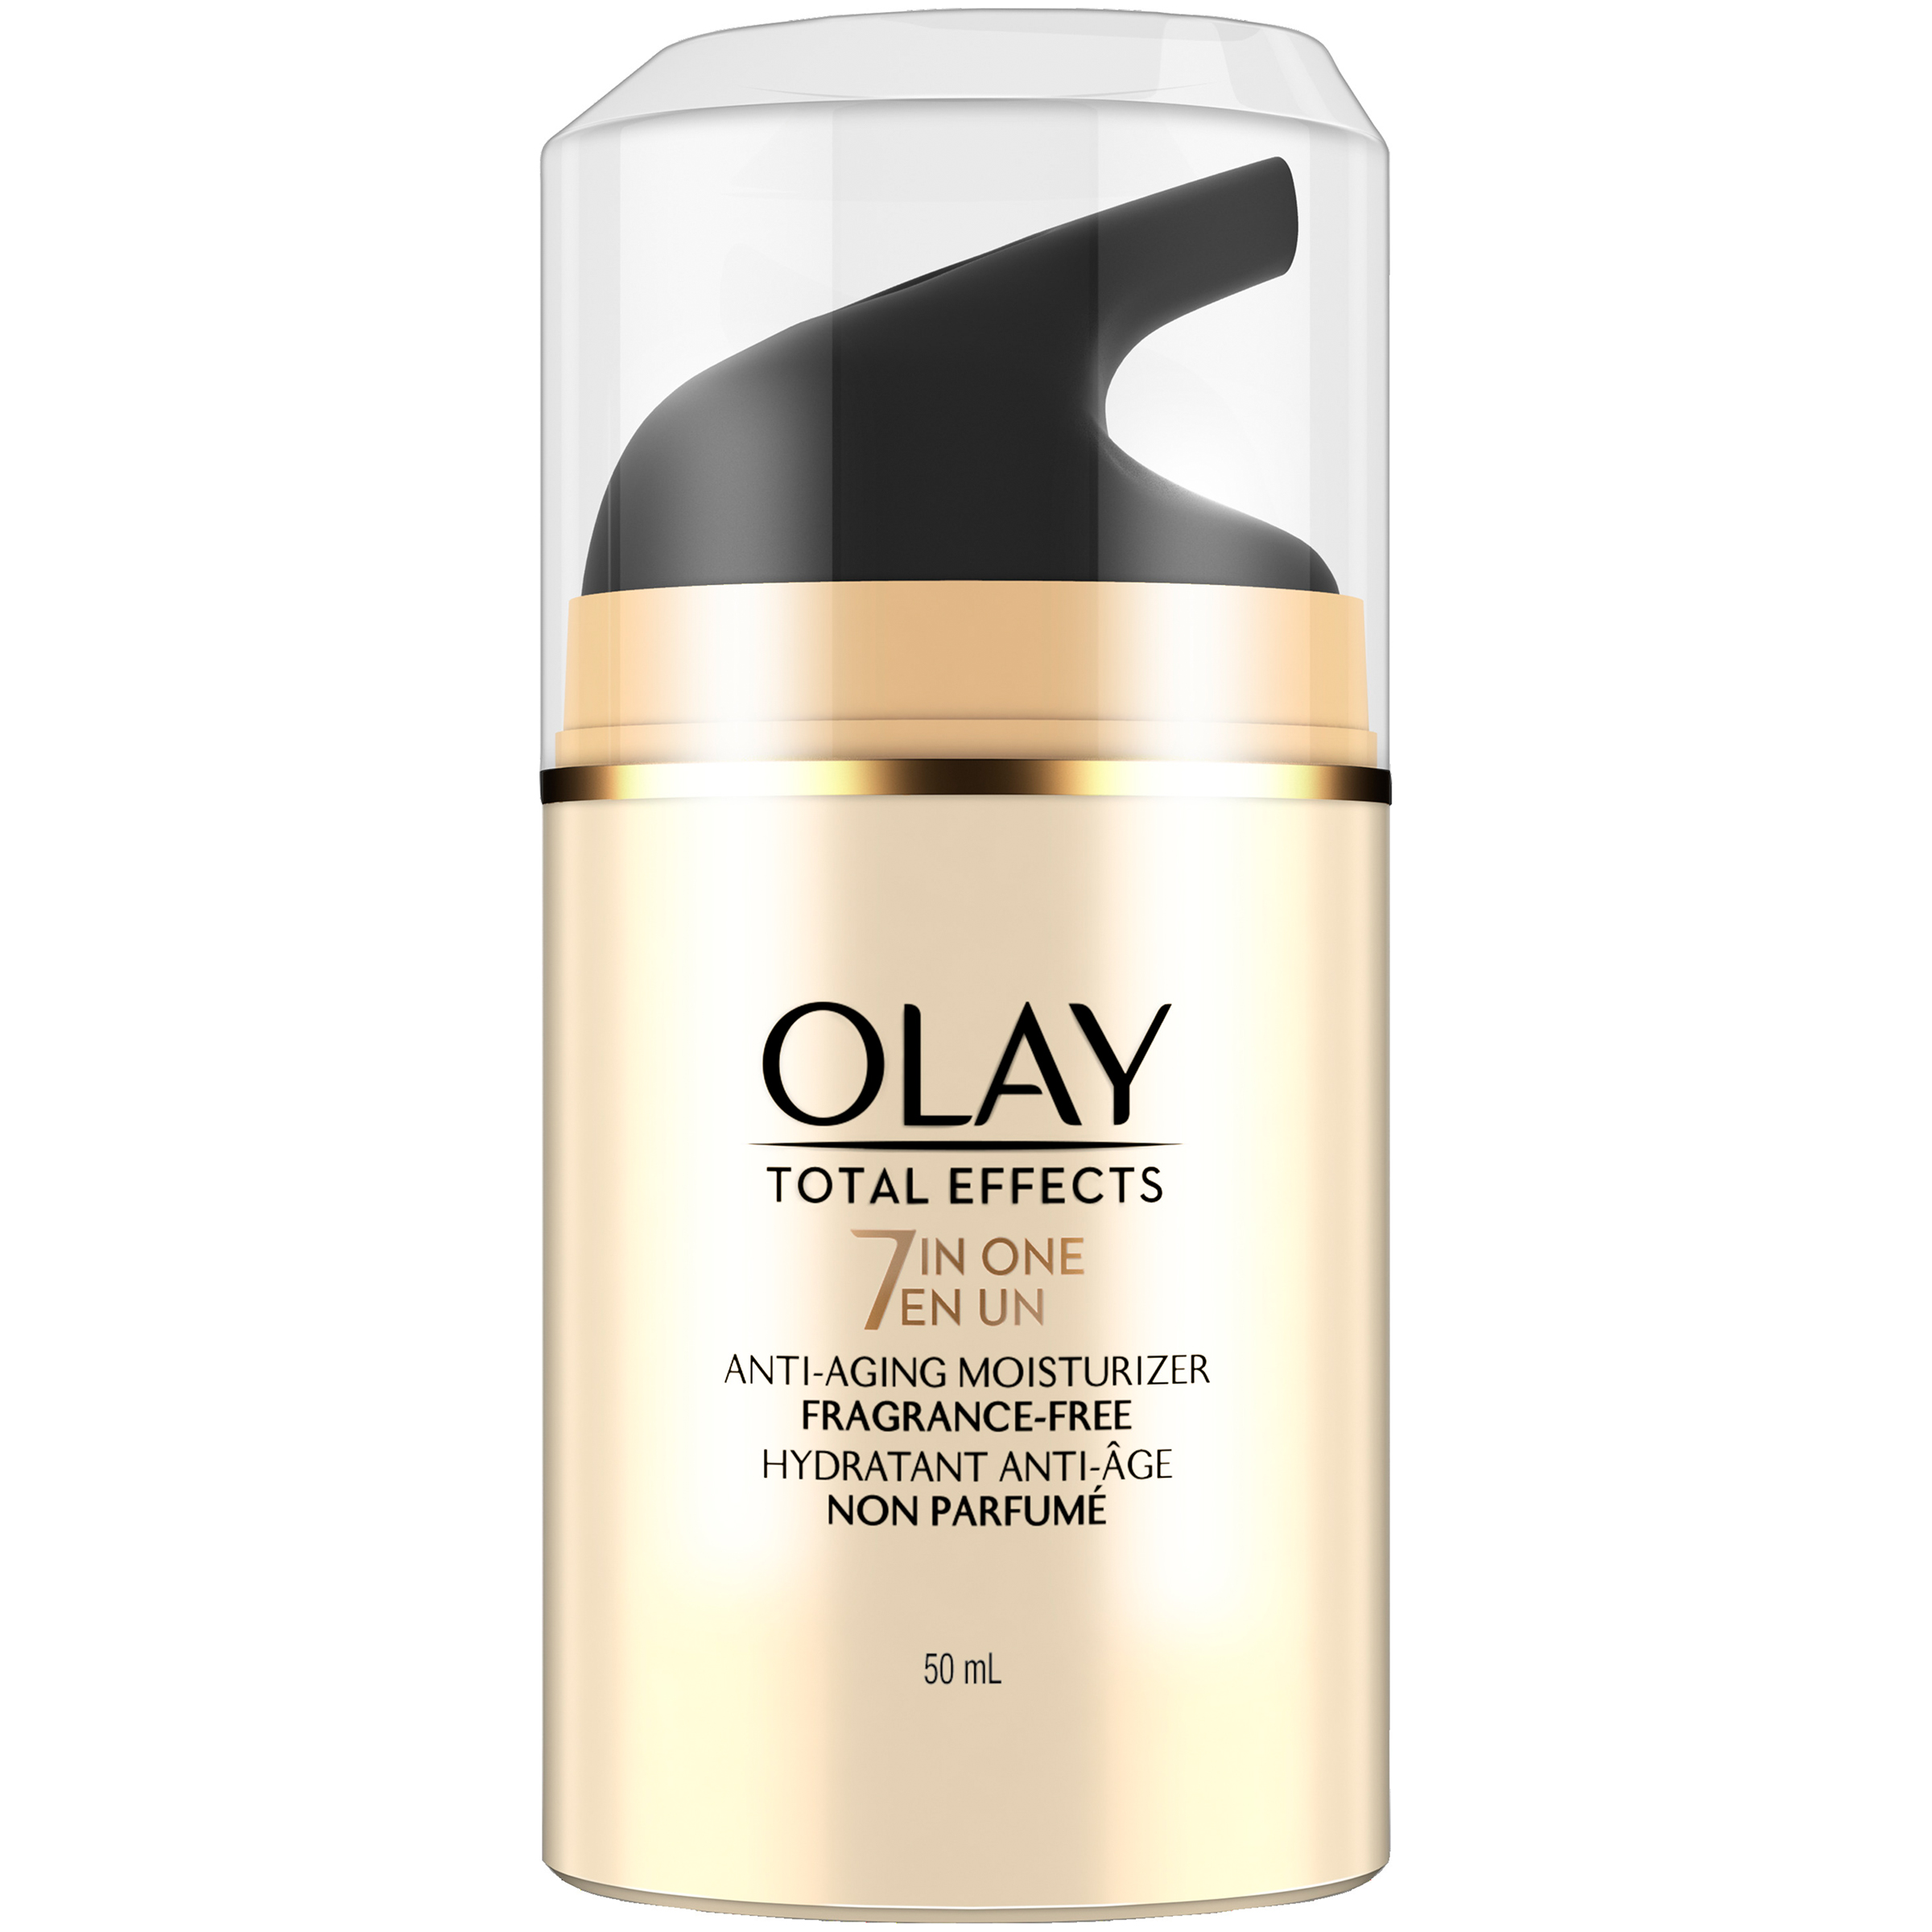 Olay Total Effects AntiAging Face Moisturizer, FragranceFree 1.7 fl. oz. Beauty Skin Care